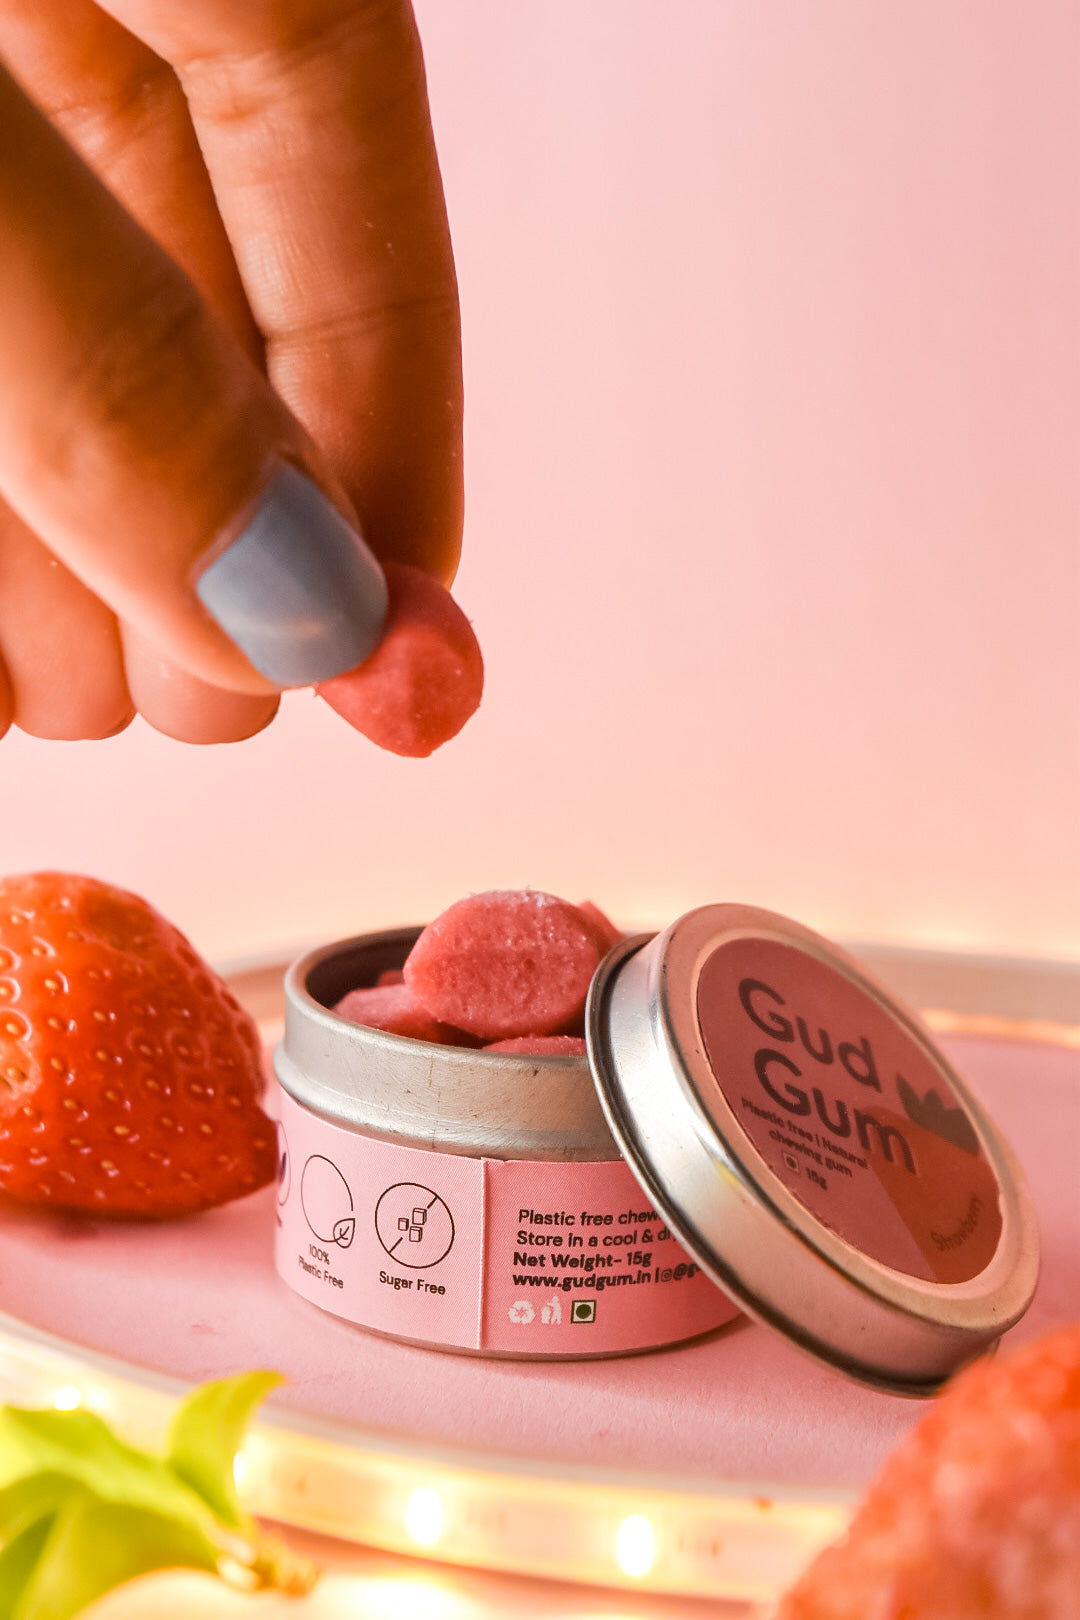 Strawberry Gum - Plastic Free, Sugar Free, Natural, Biodegradable, Vegan Chewing Gums | No added colours and flavours- (10 pieces per pack)- 15g - Tin Packaging